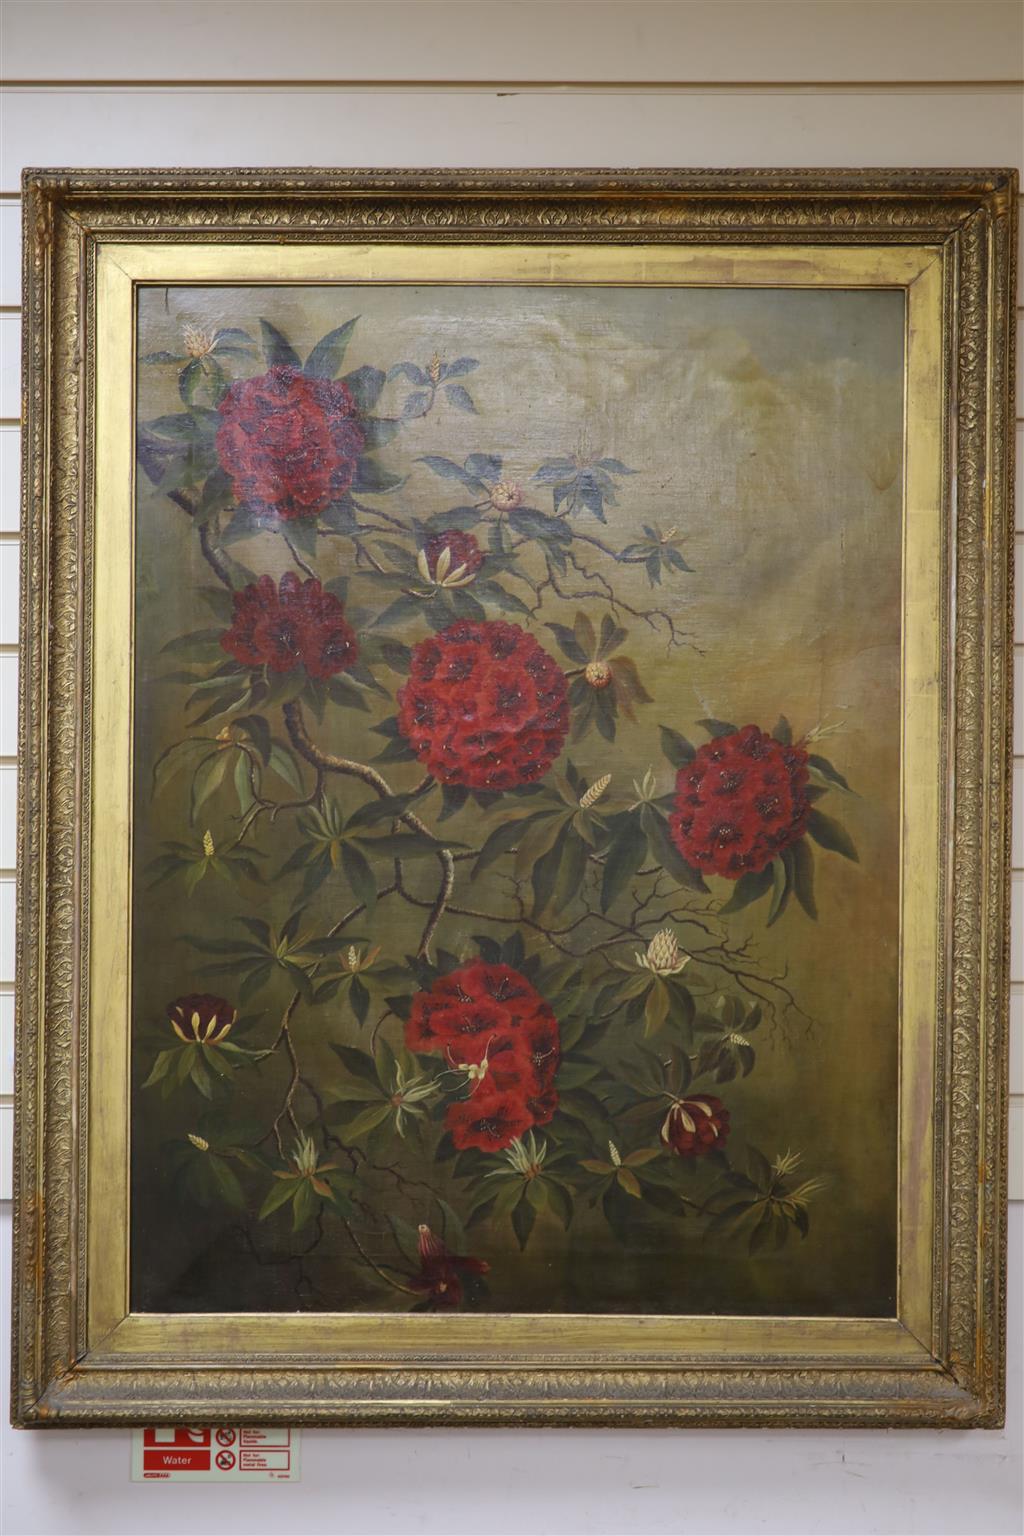 English School c.1900, oil on canvas, Study of Rhododendron blossom, indistinctly signed, 90 x 67cm